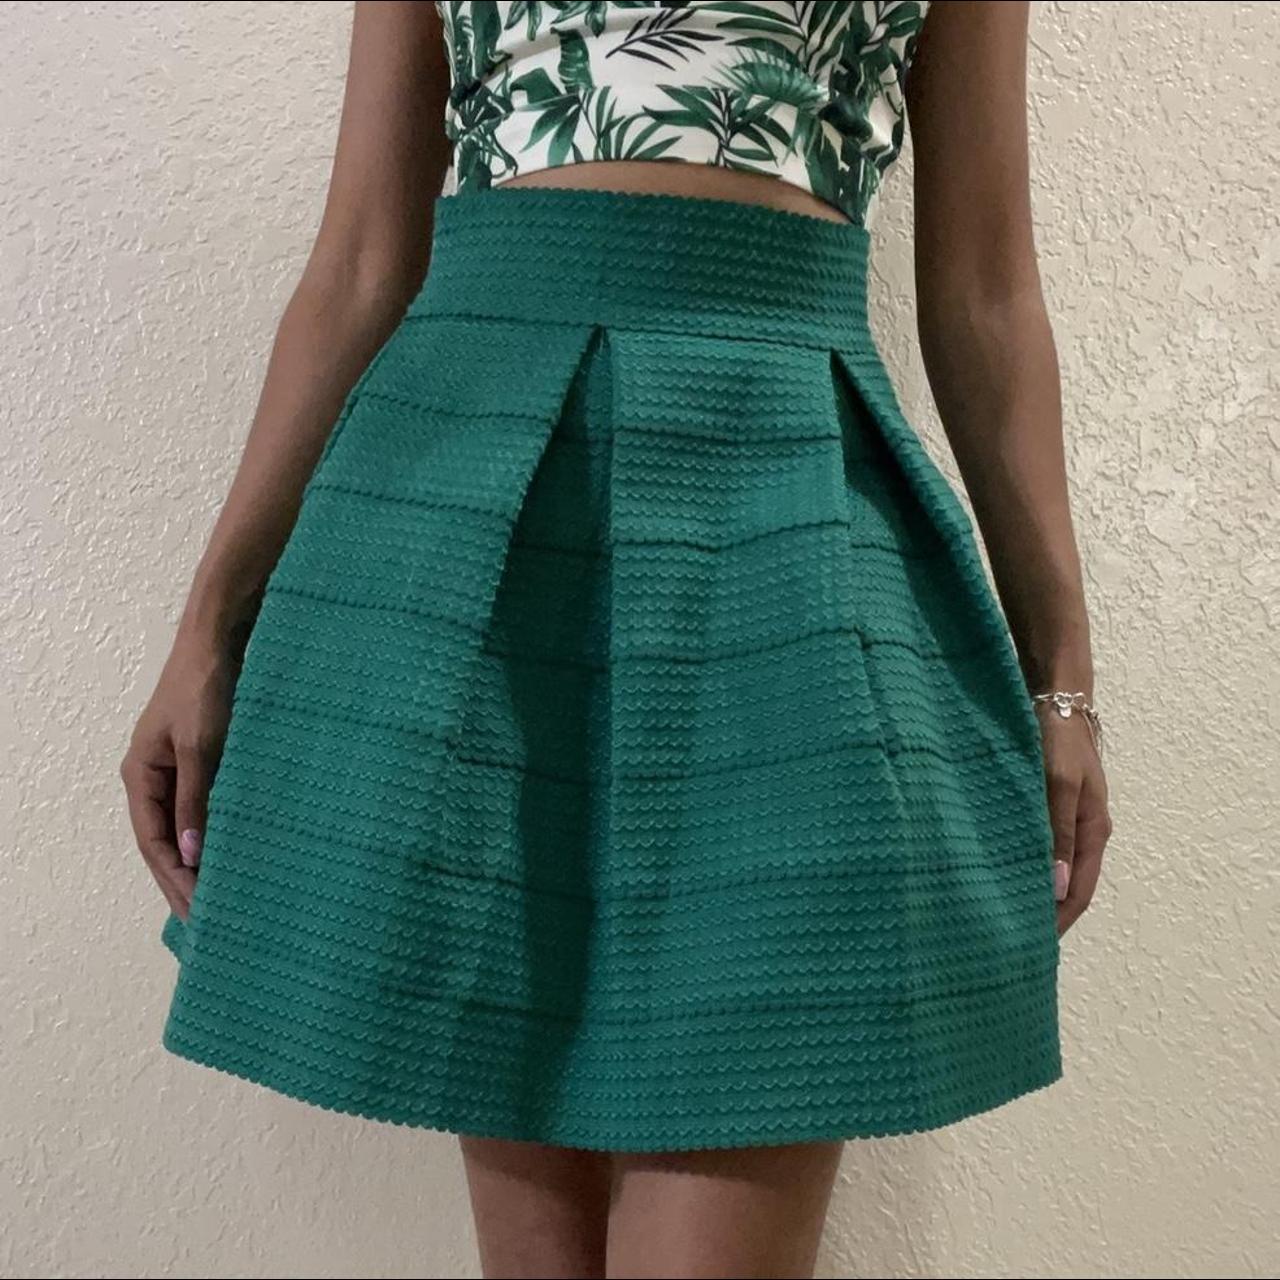 Product Image 1 - Green pleated skirt! Very structured